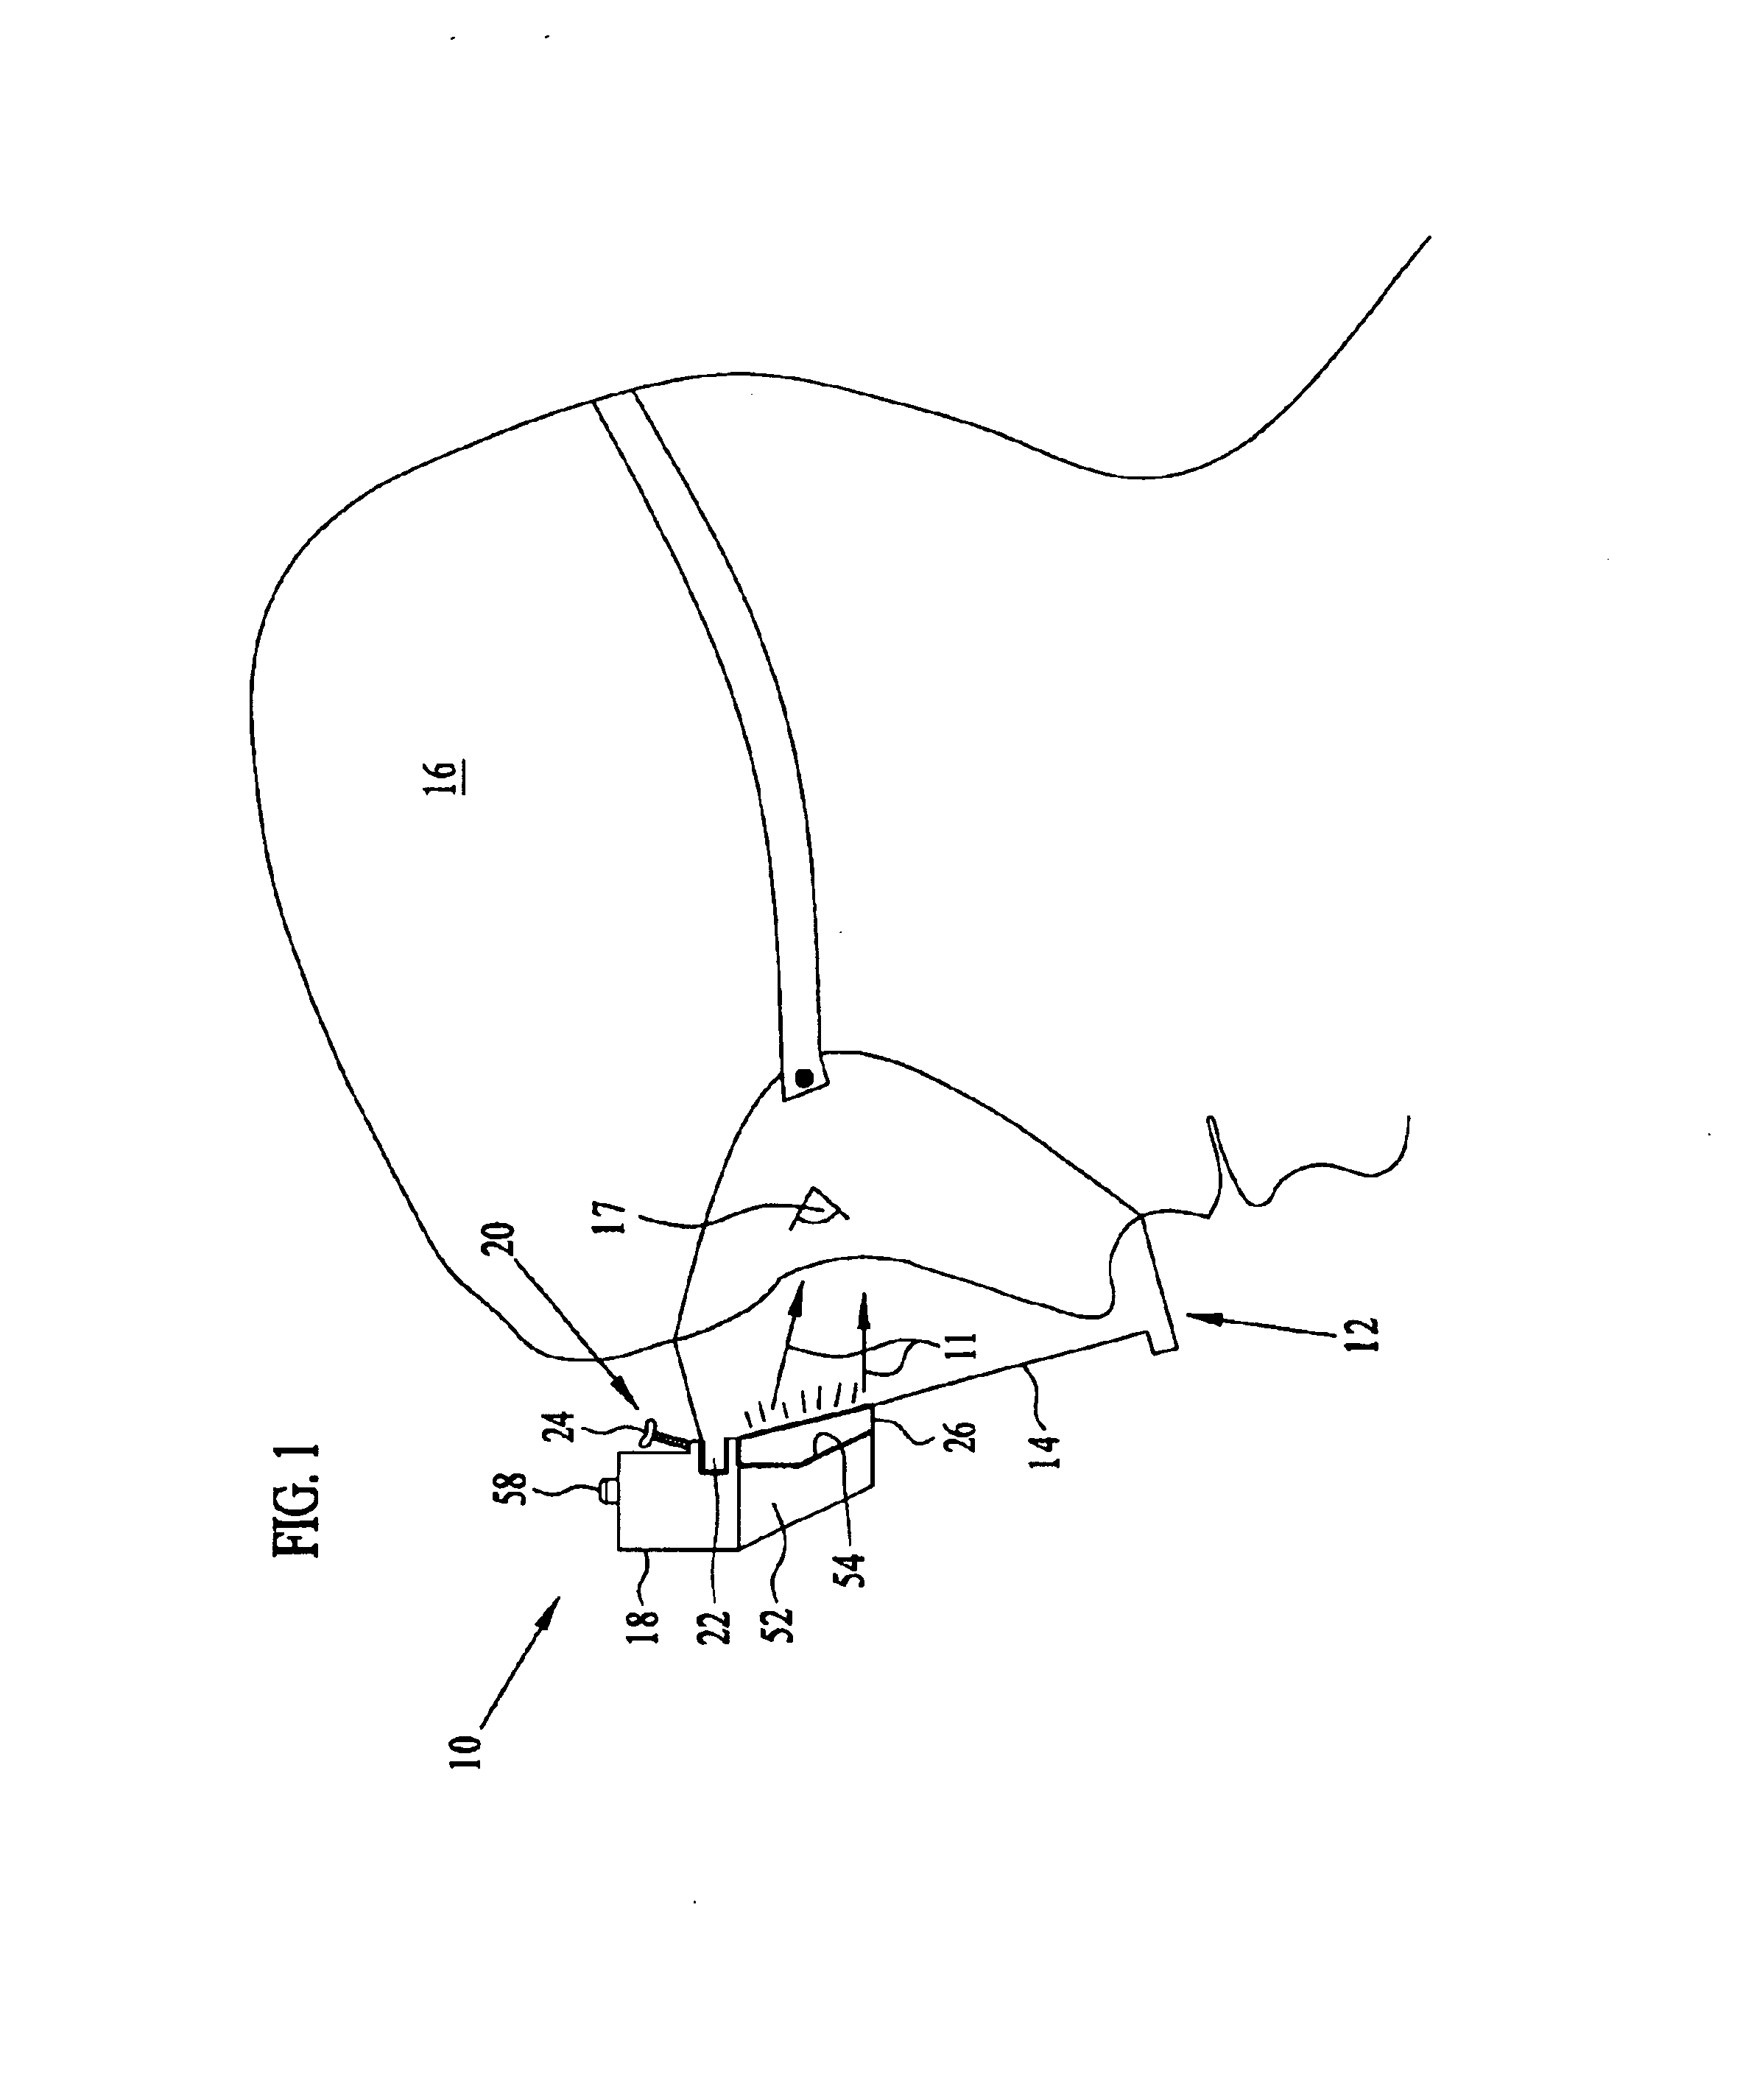 Small head-mounted compass system with optical display